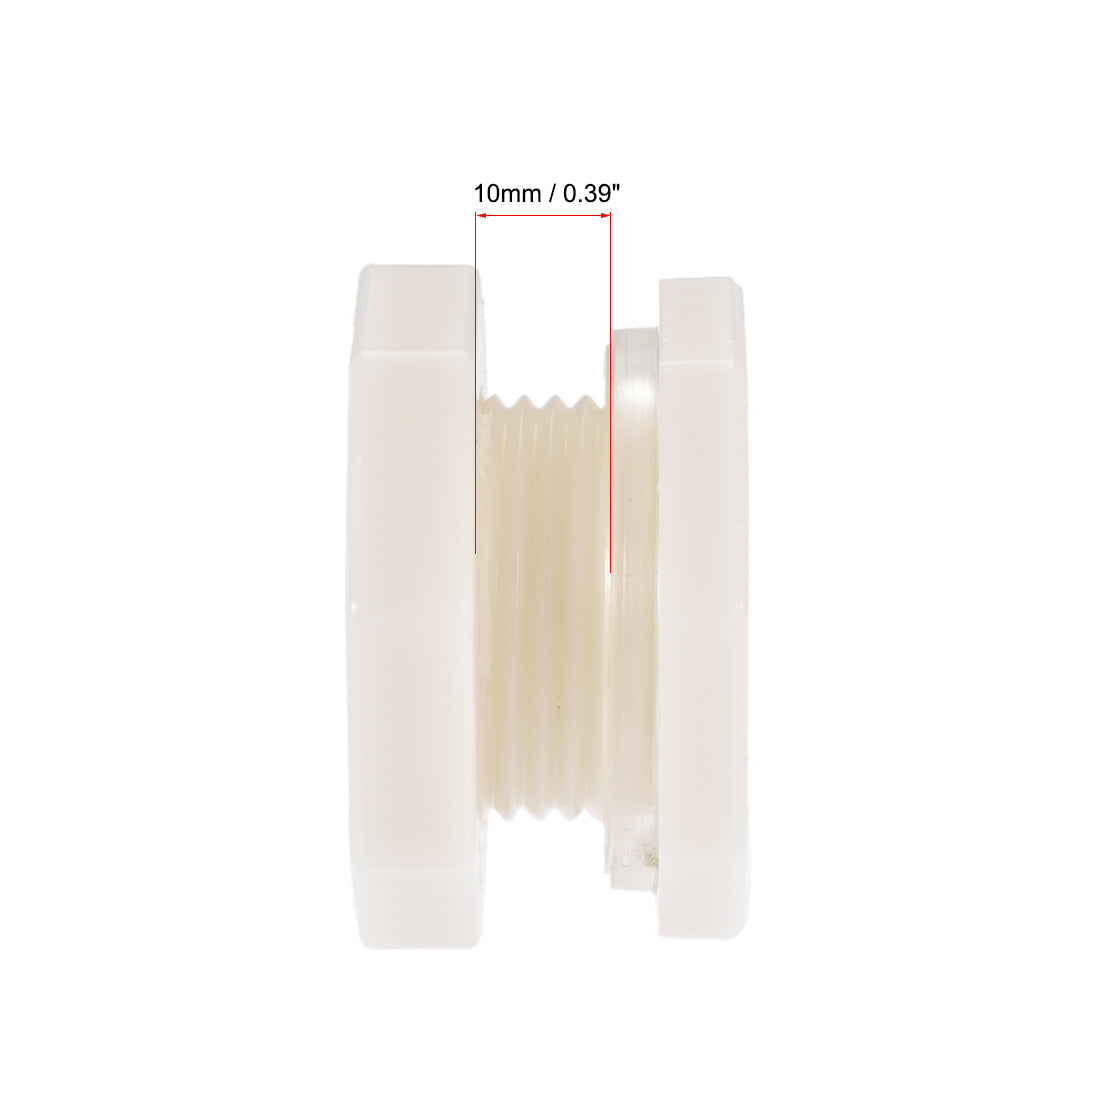 uxcell Uxcell Bulkhead Fitting, G3/4 Female 1.38" Male, Tube Adaptor Fitting, with Silicone Gasket and Pipe Connector, for Water Tanks, PVC, White